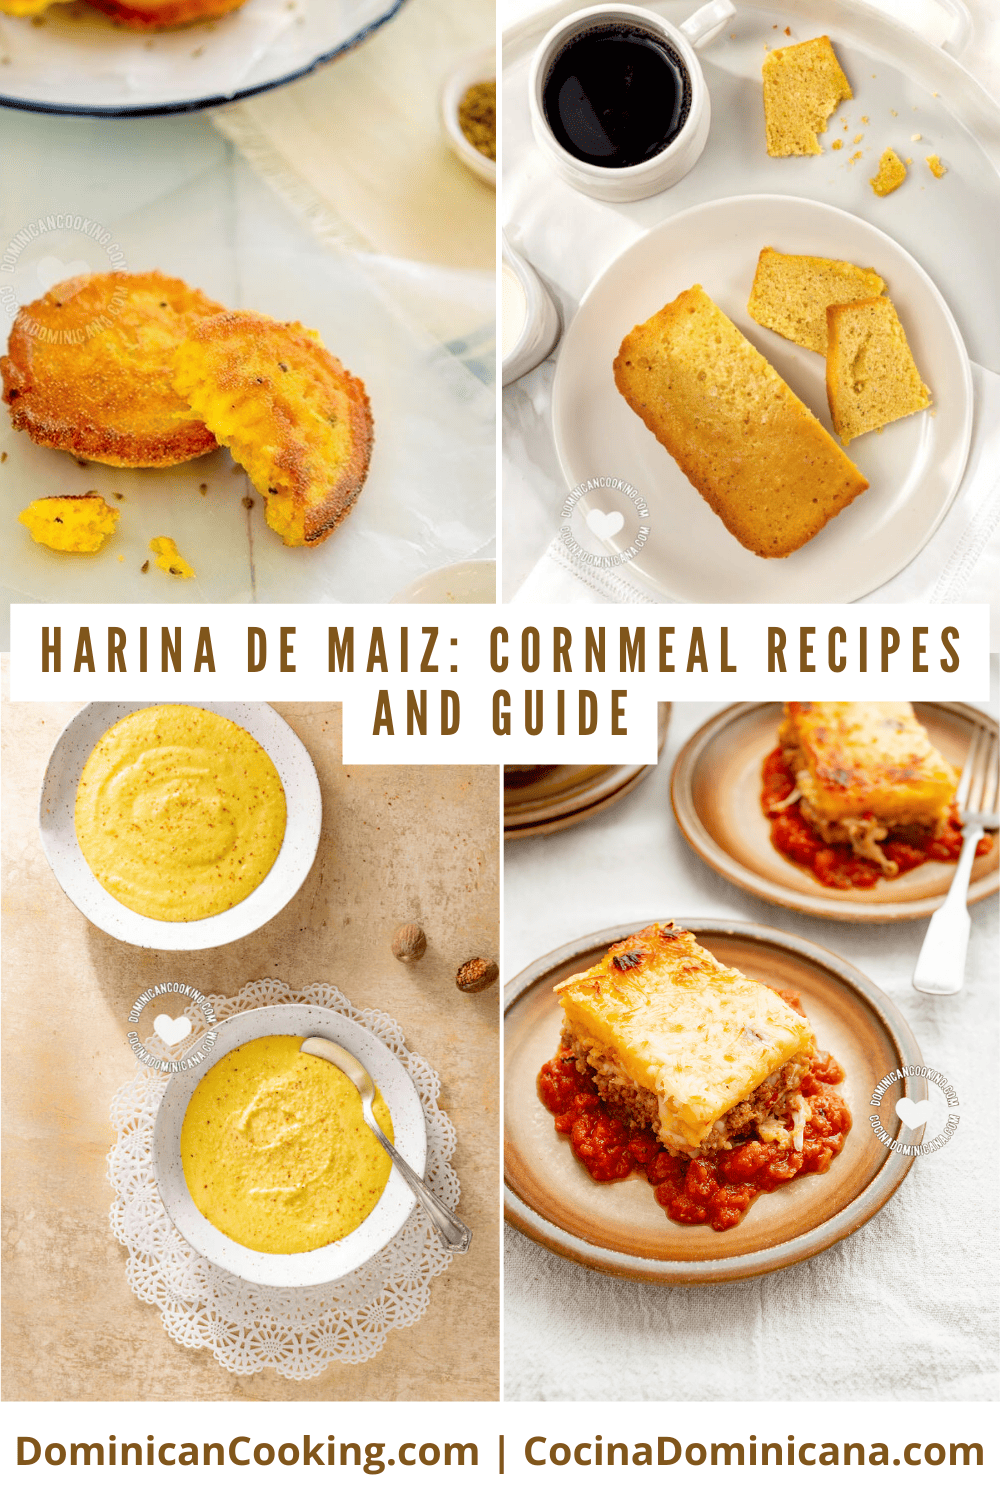 Cornmeal recipes and guide.